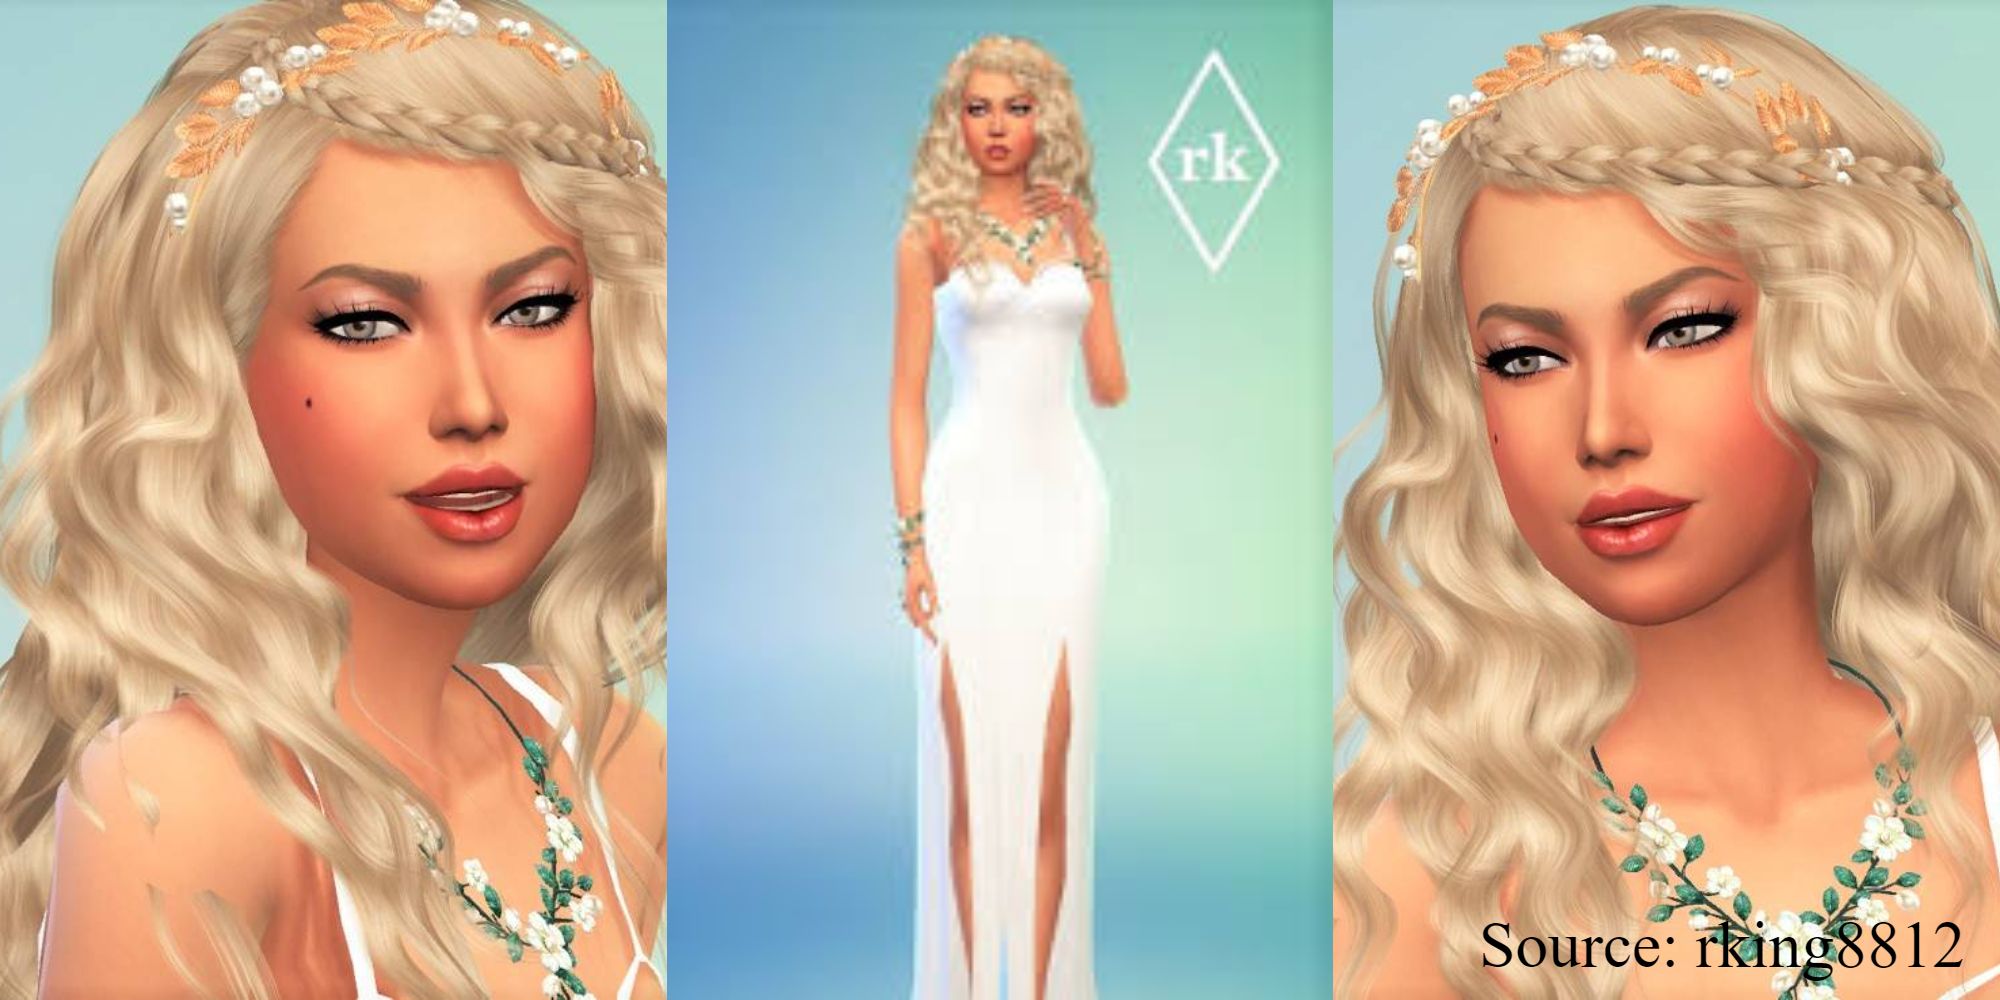 User rking8812 has created a Greek goddess standing in for Aphrodite